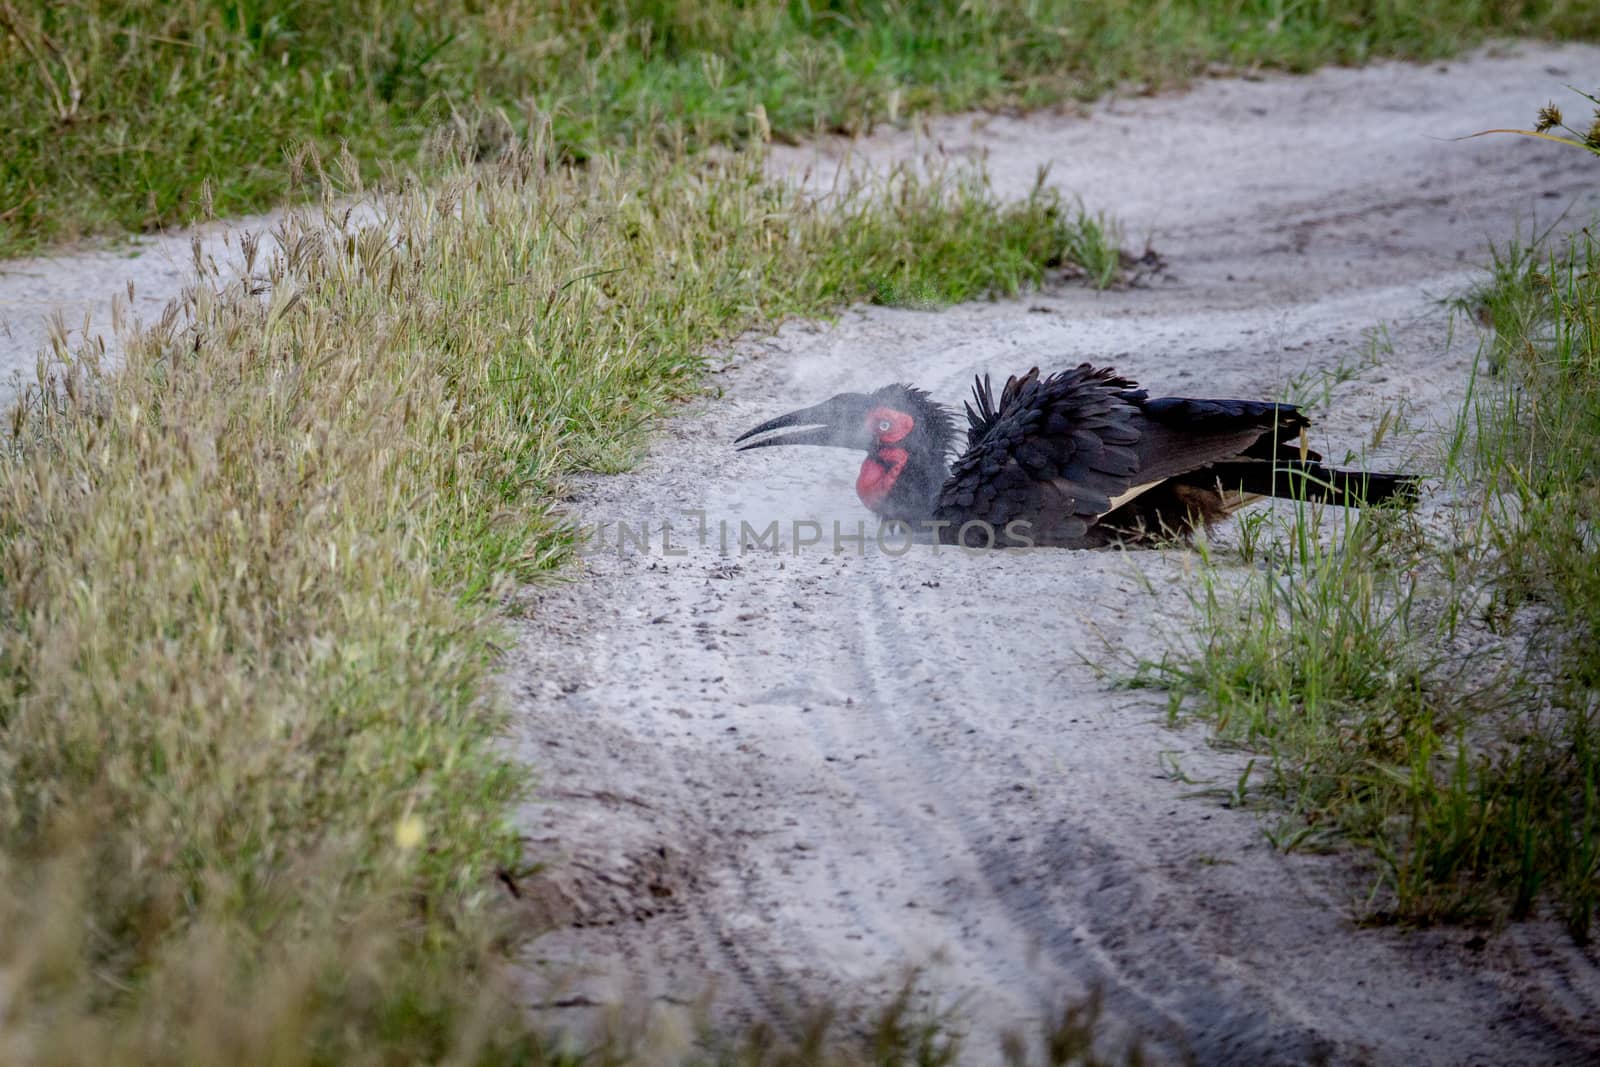 Southern ground hornbill taking a dust bath in the Chobe National Park, Botswana.